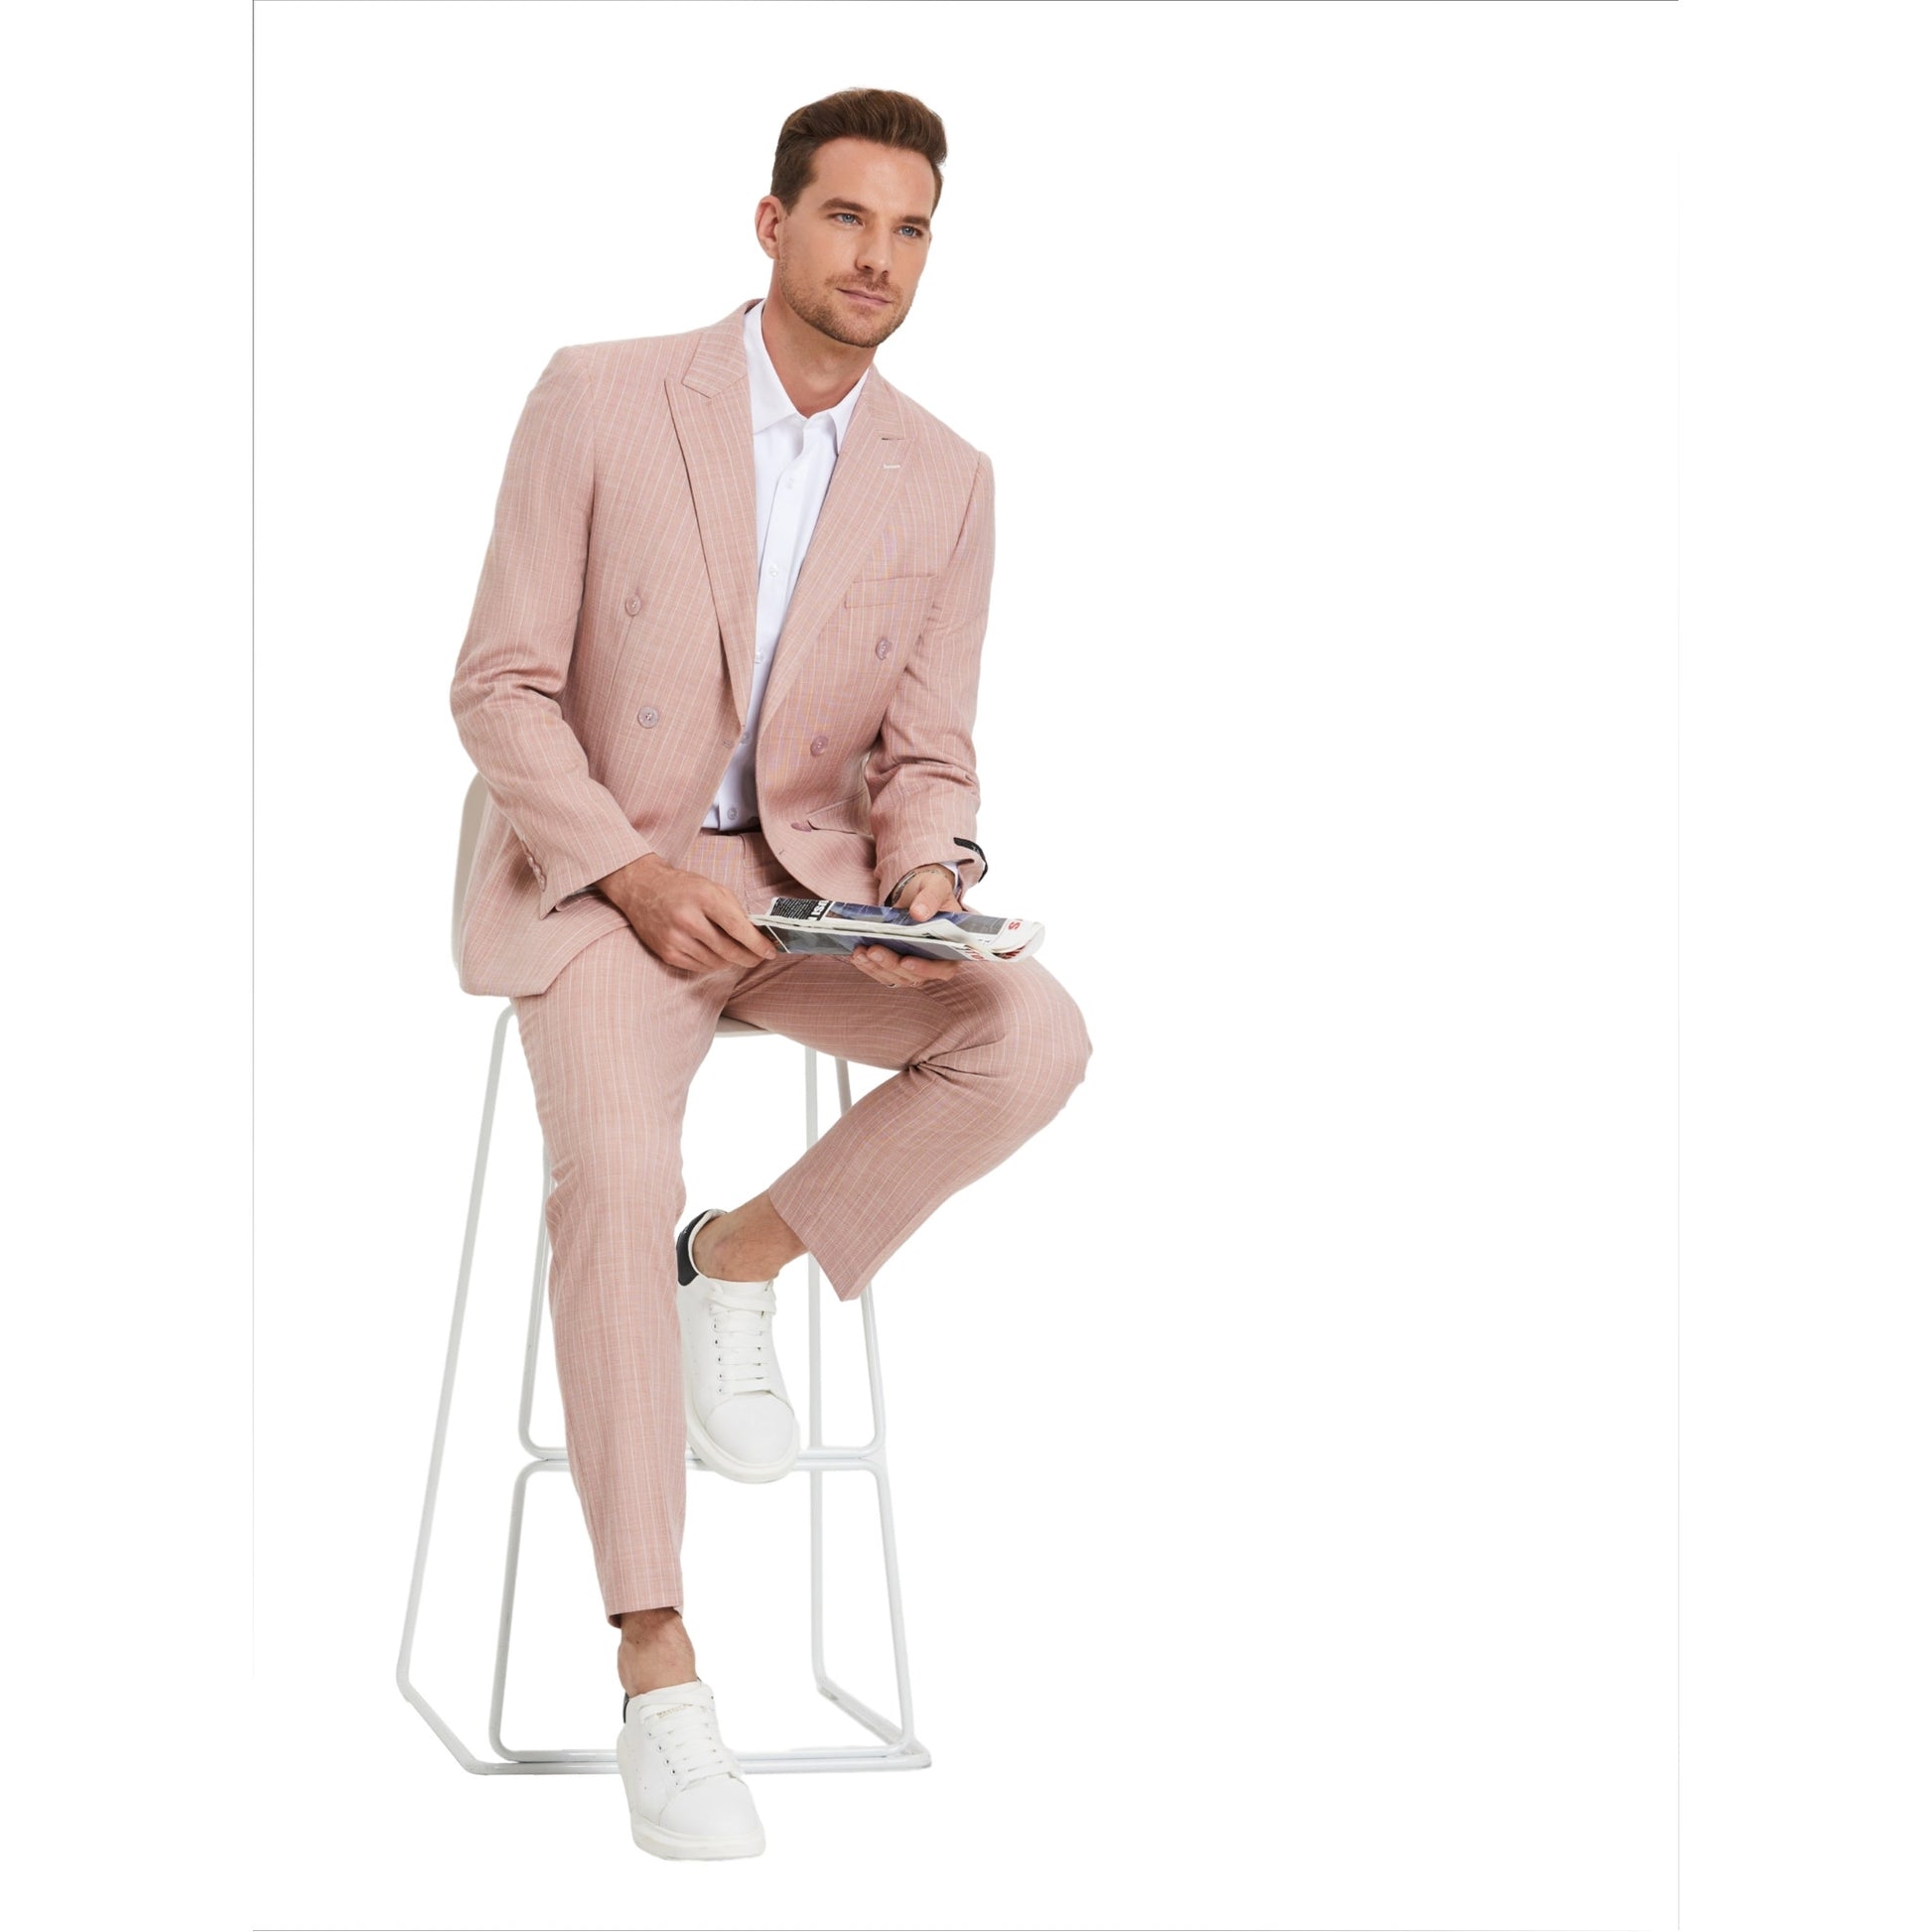 Model seated on stool wearing KCT Menswear's Pastel Pink Pinstripe Double-Breasted Suit, exuding casual sophistication